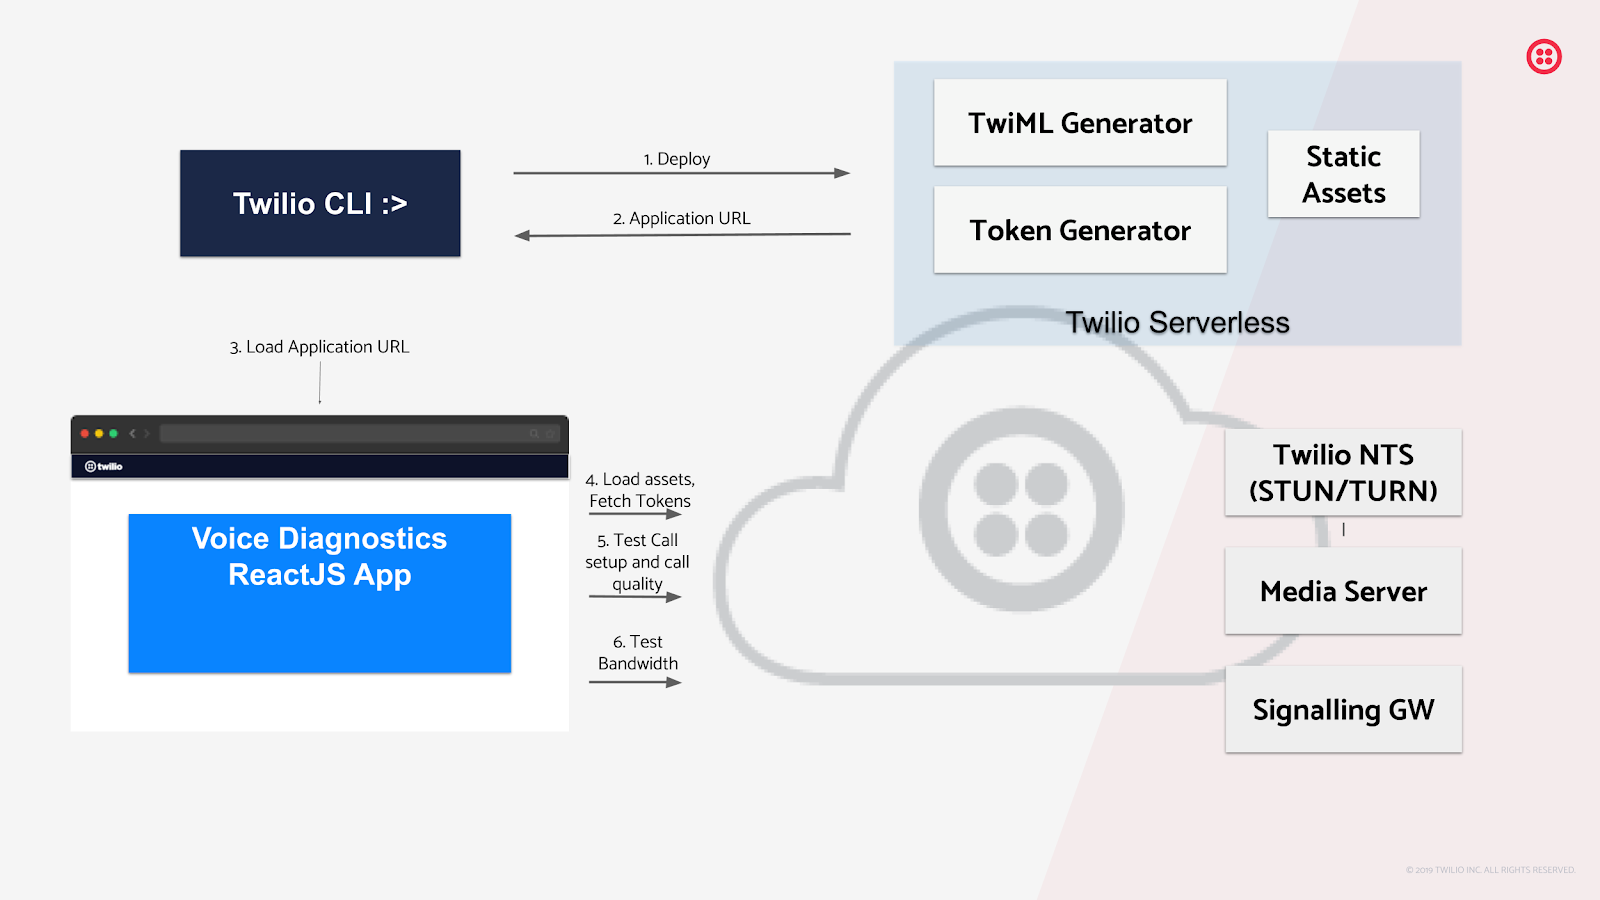 Image shows a high level overview of the Diagnostics Web App deployment and interaction with Twilio